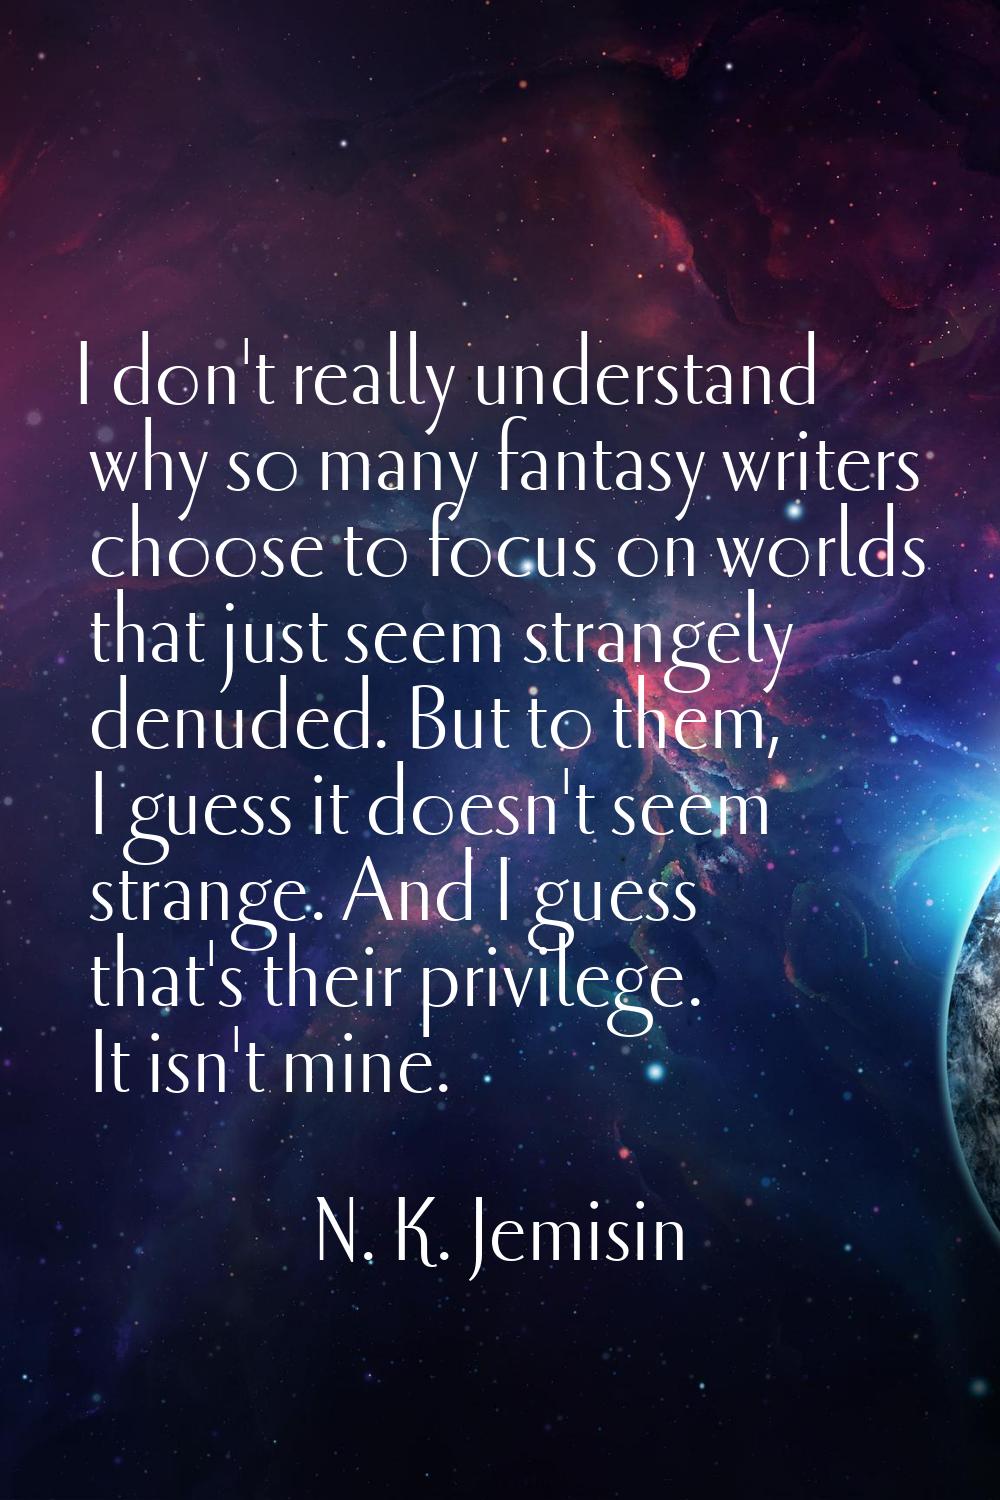 I don't really understand why so many fantasy writers choose to focus on worlds that just seem stra